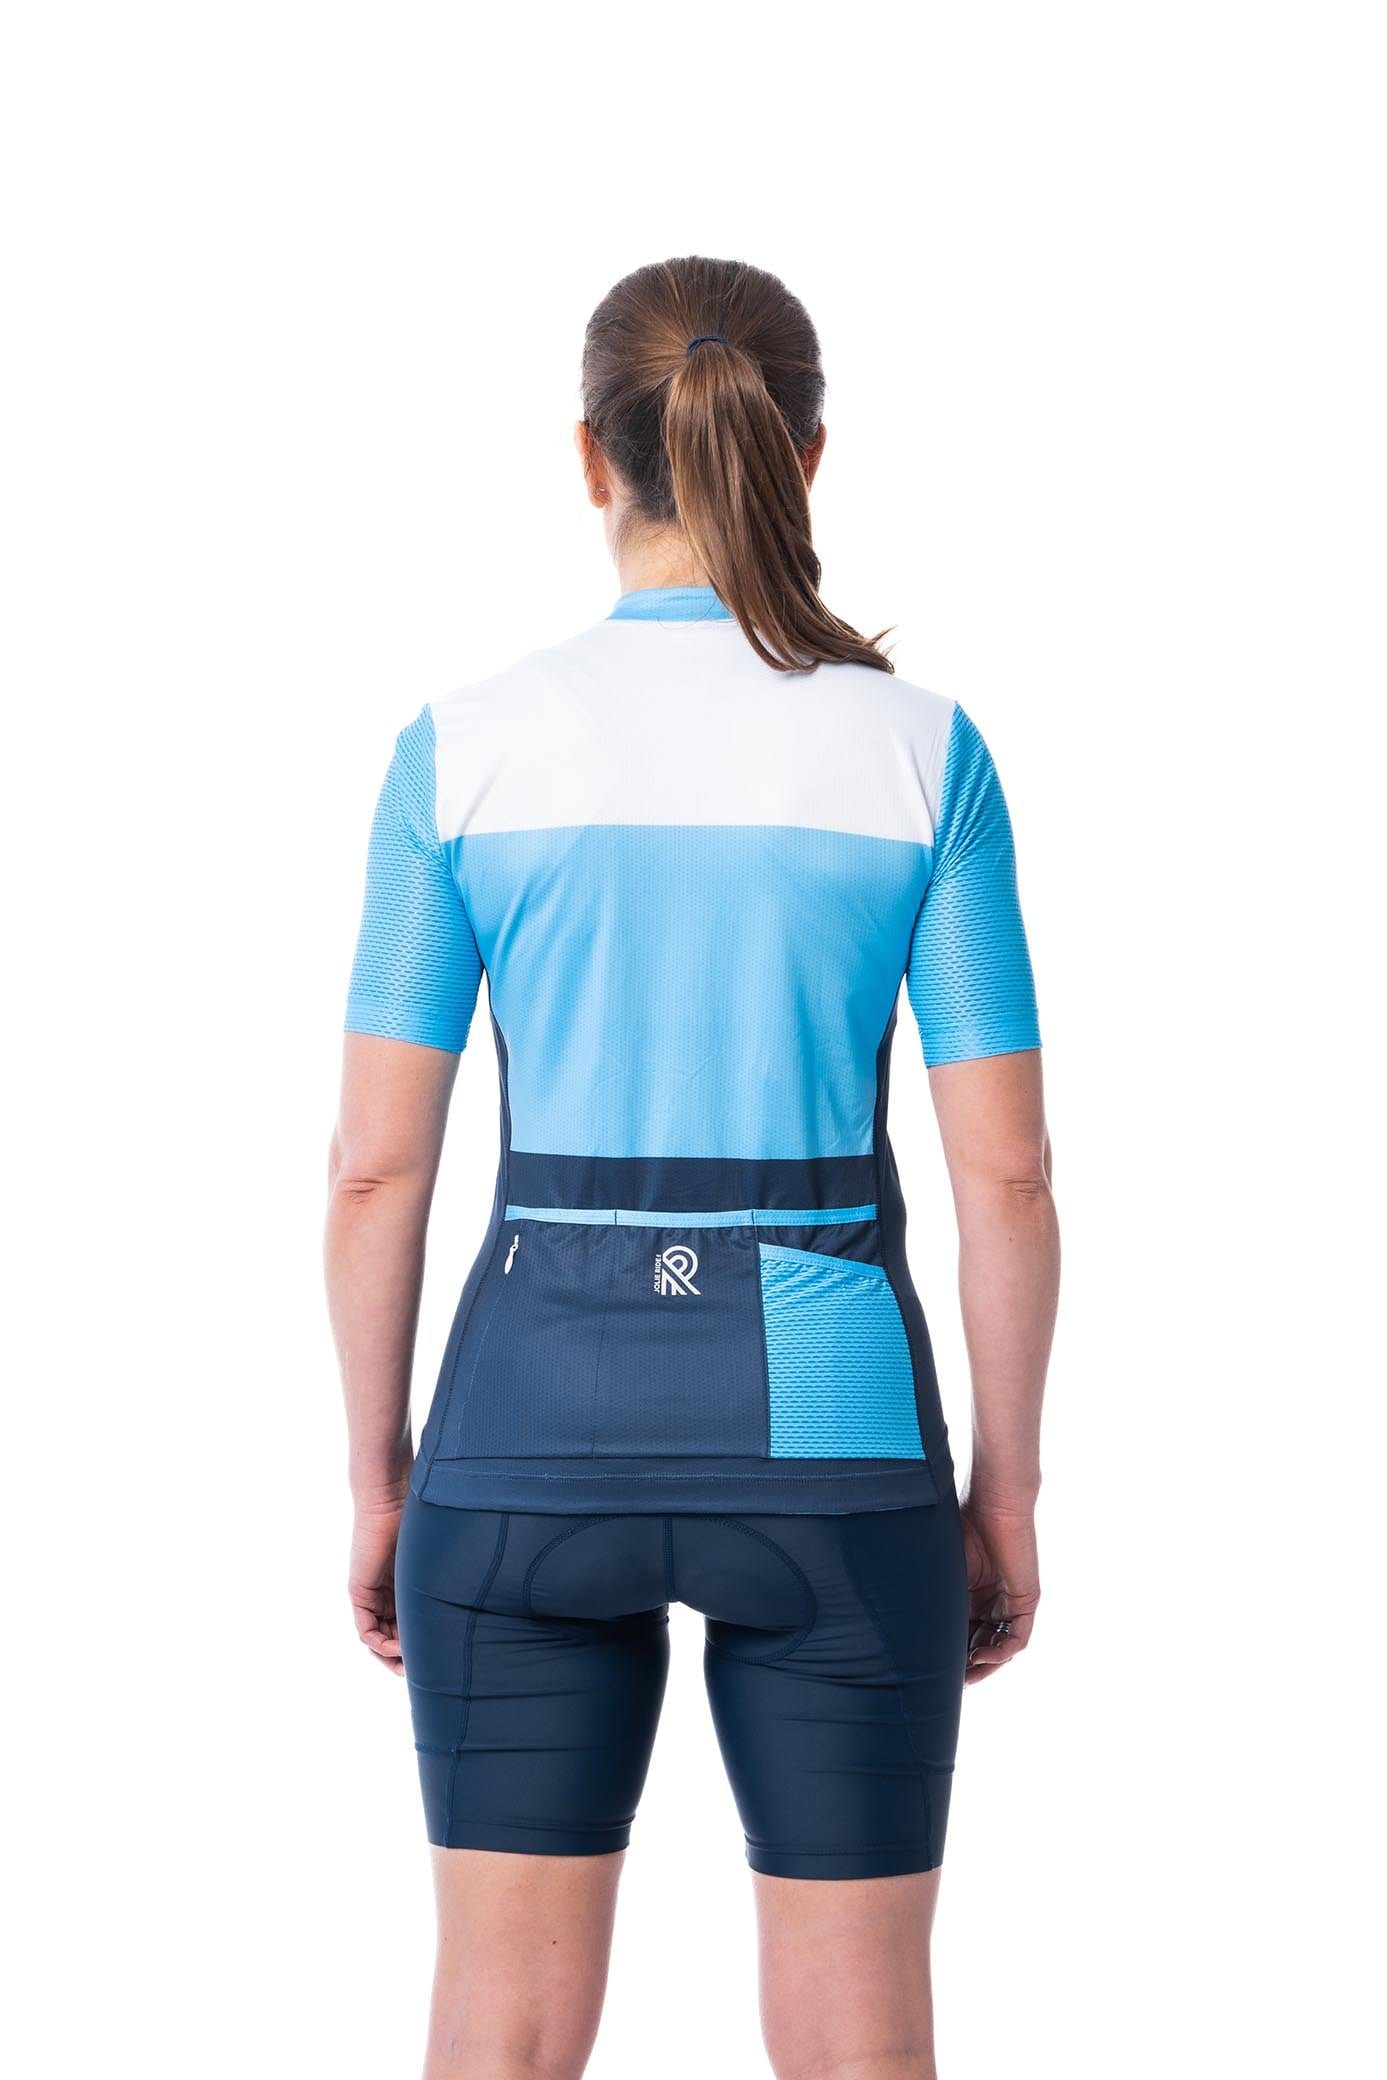 JolieRide Jersey women's colorblock cycling jersey with UV protection, breathability, and storage